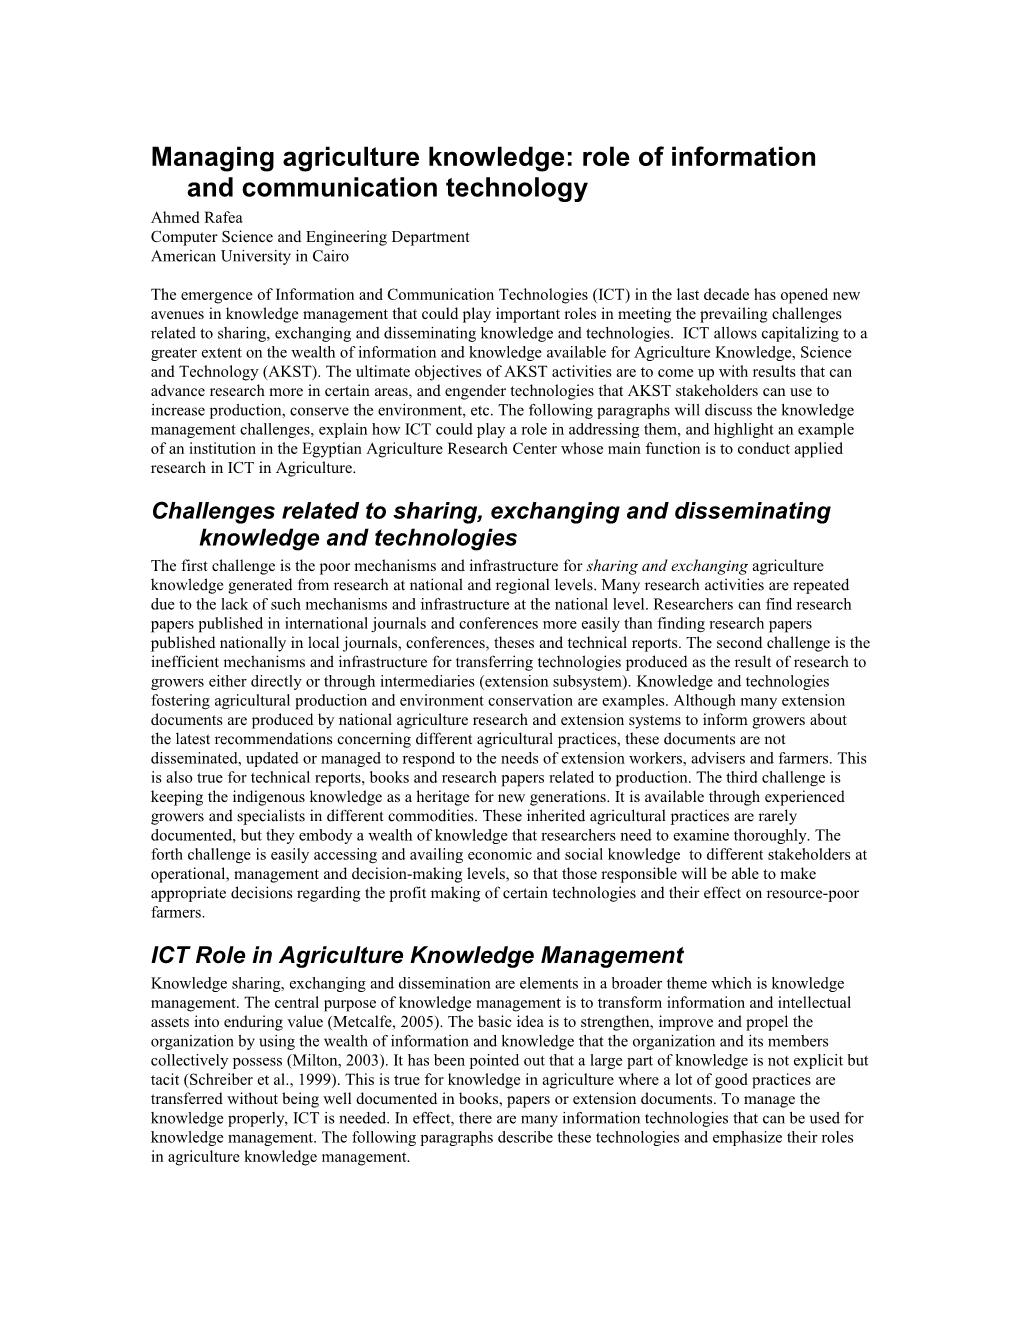 Agriculture Knowledge Management Using Information and Communication Technology (Extended